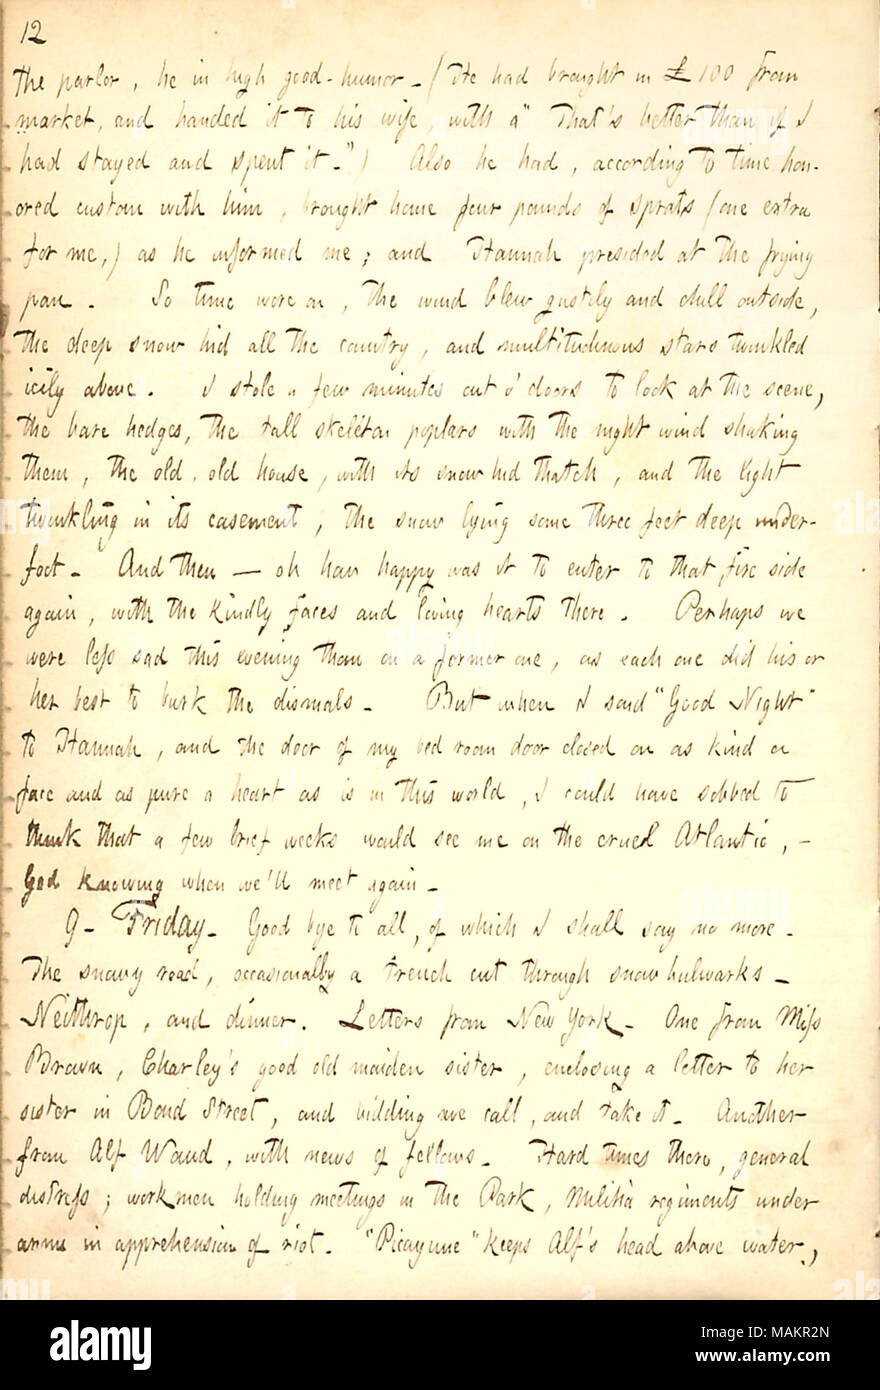 Describes his last night with the Bennett family in Chacombe and a letter from Alf Waud in New York.  Transcription: the parlor, he [Michael Bennett] in high good-humor. (He had brought in 100 [pounds] from market, and handed it to his wife [Charlotte Chinner Bennett], with a ?ǣThat ?s better than if I had stayed and spent it. ?) Also he had, according to time honored custom with him, brought home four pounds of sprouts (one exta for me,) as he informed me; and Hannah [Bennett] presided at the frying pan. So time wore on, the wind blew gustily and chill outside, the deep snow hid all the count Stock Photo